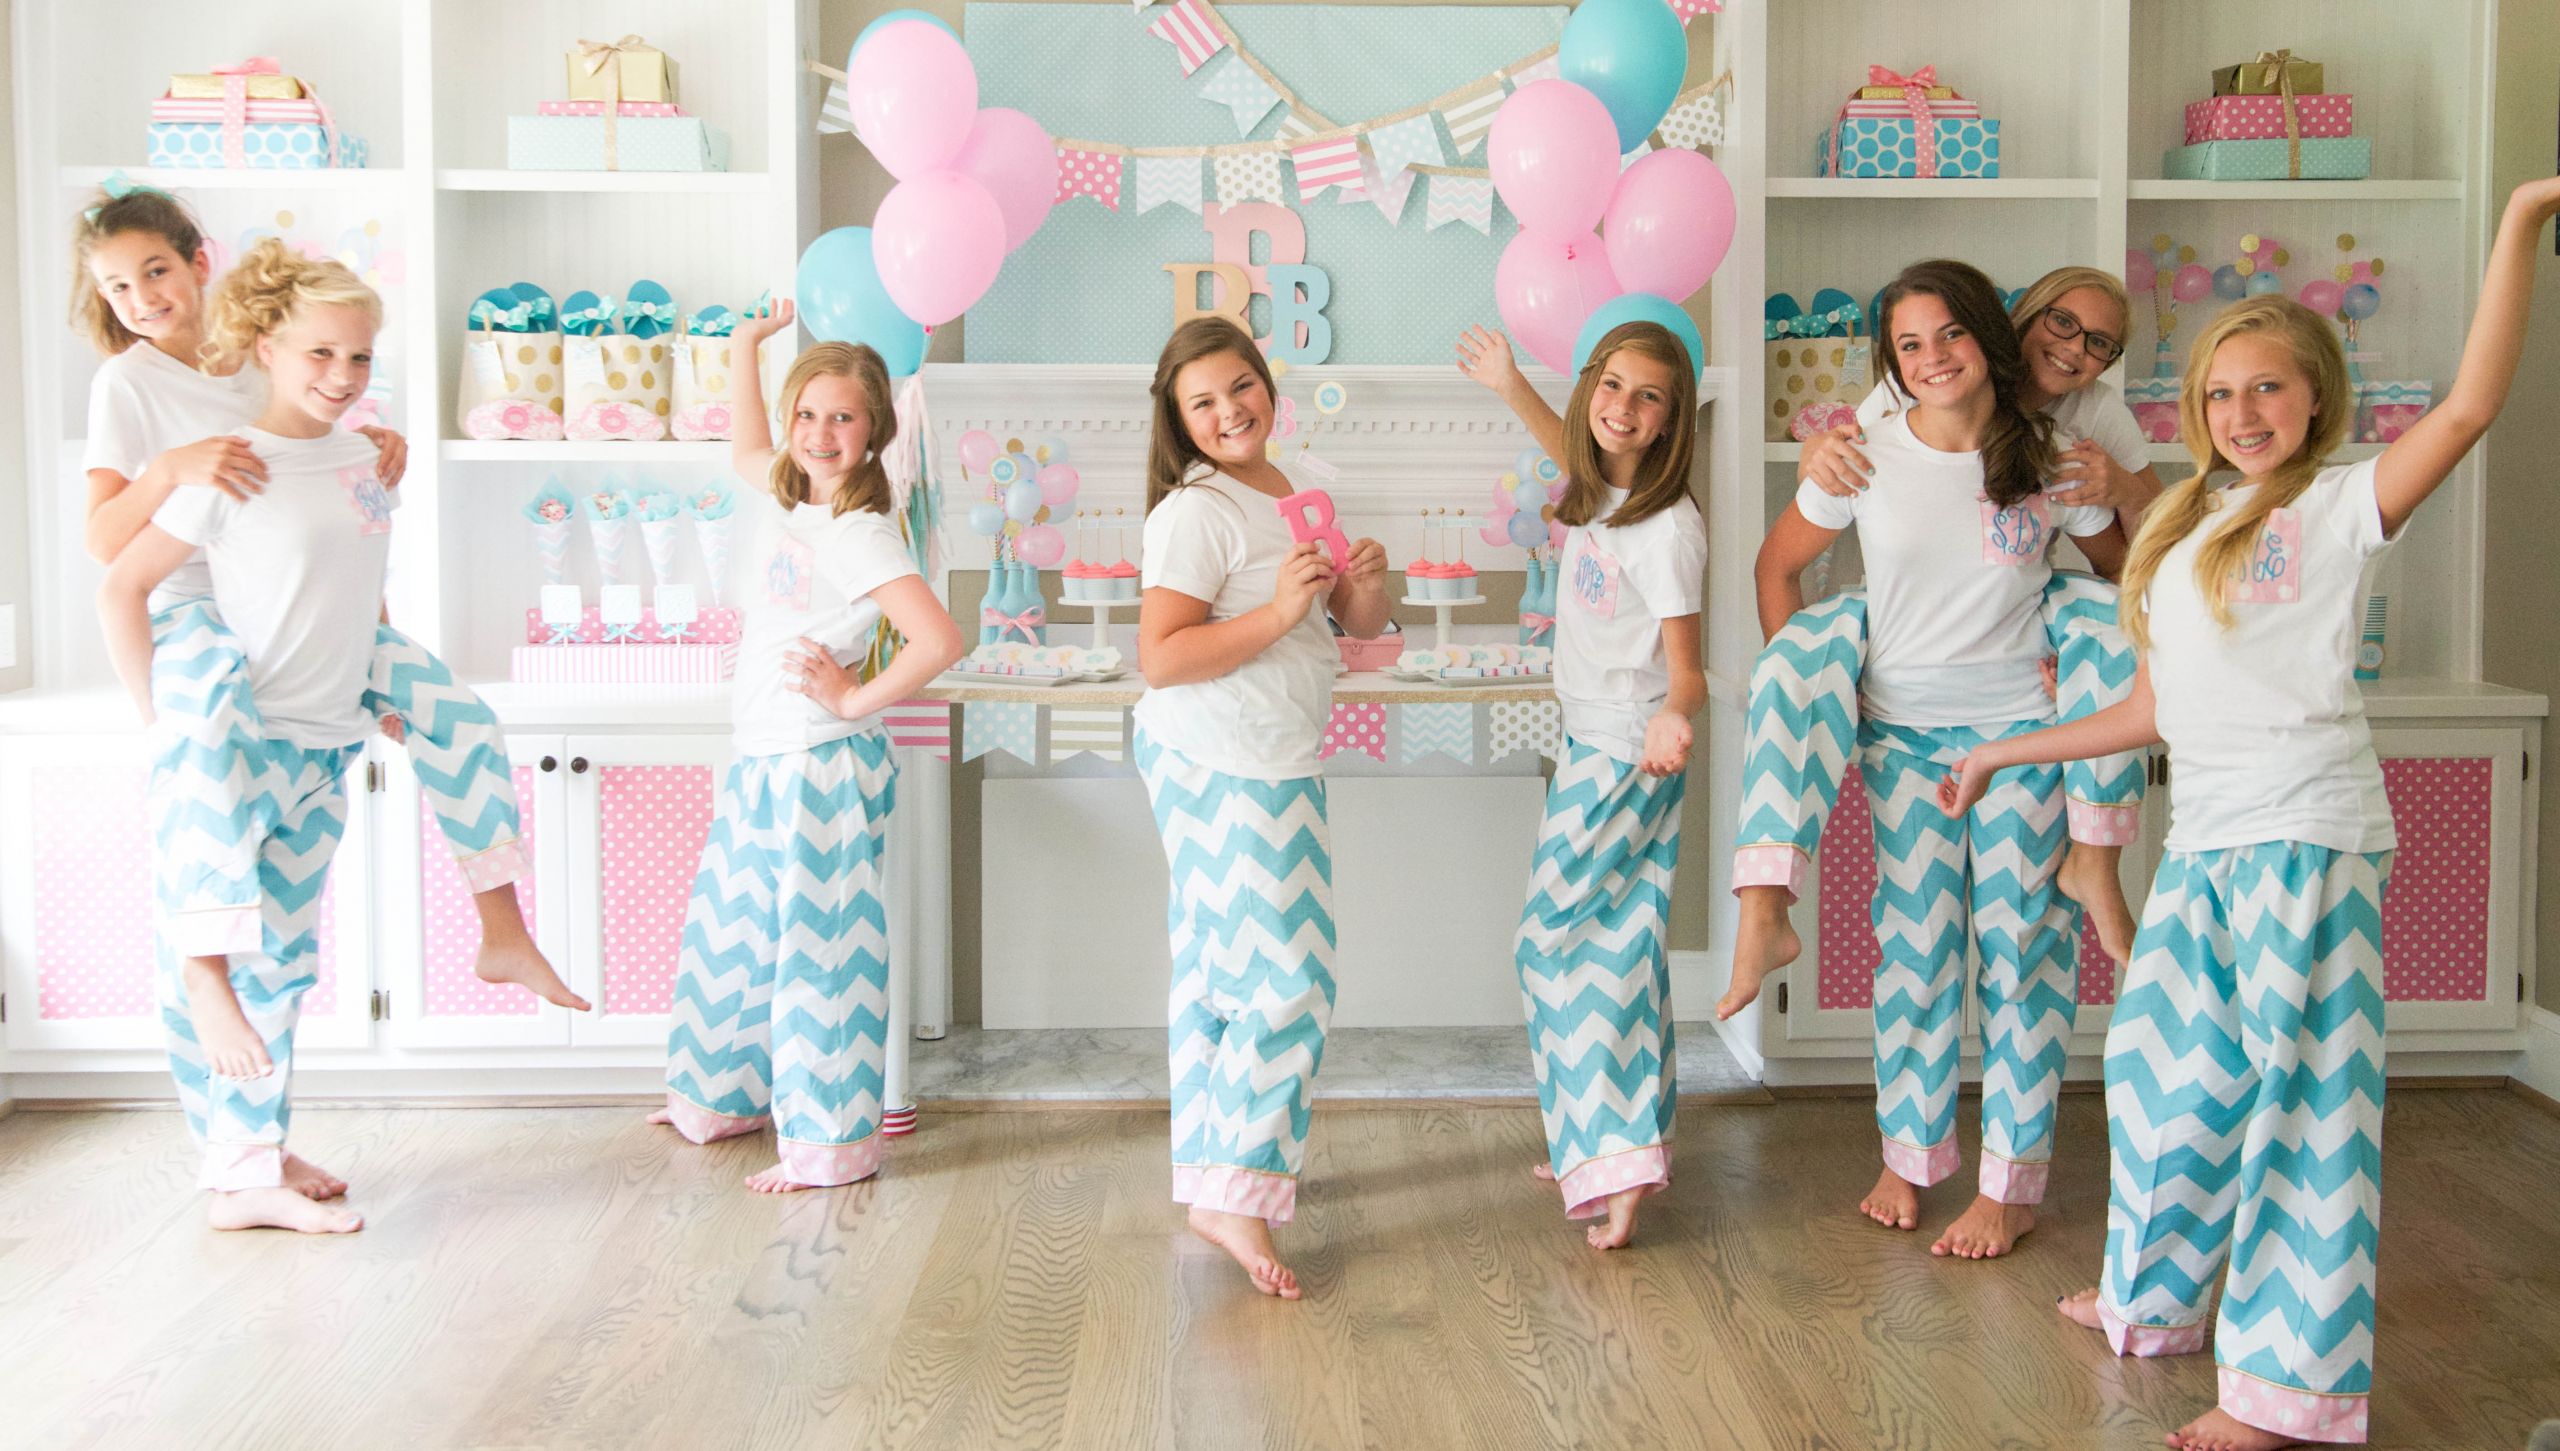 Birthday Party Ideas For Teenage Girl 14
 Brynne s Monogram Slumber Birthday Party for Balloon Time